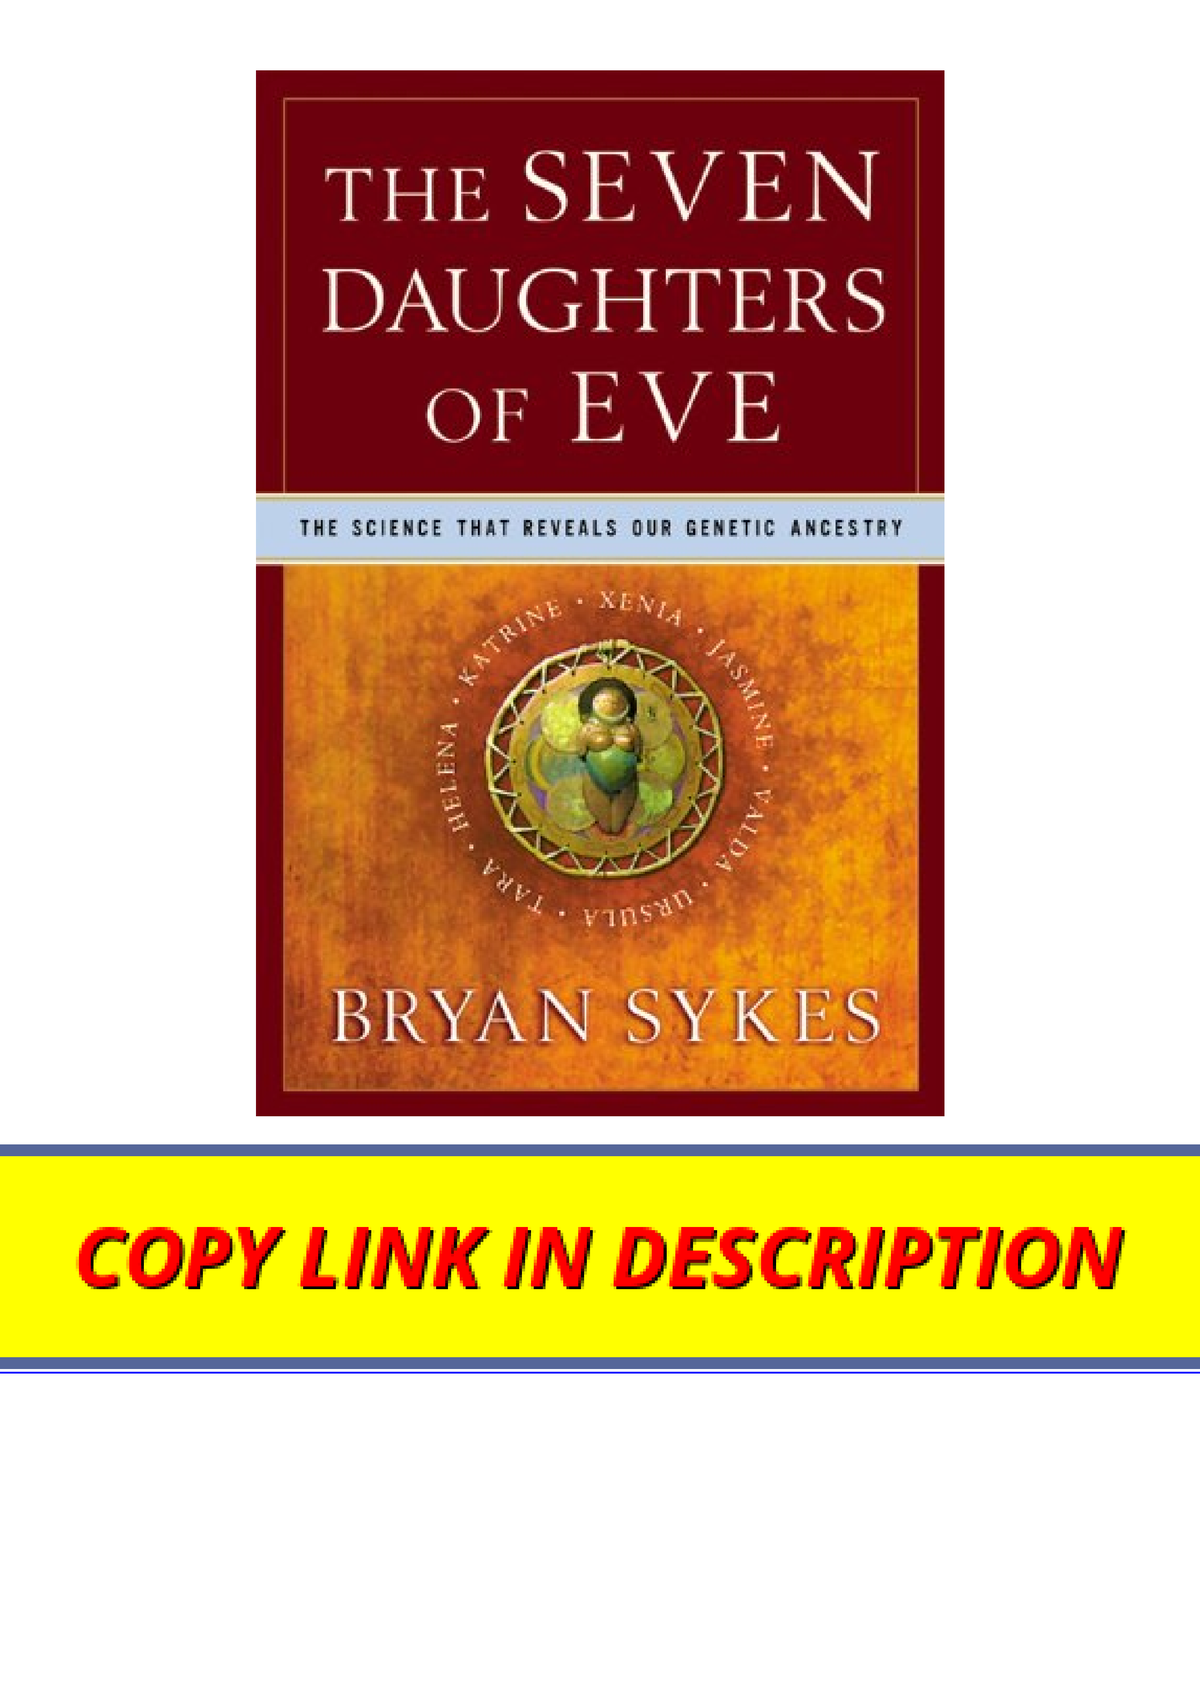 Download Pdf The Seven Daughters Of Eve The Science That Reveals Our